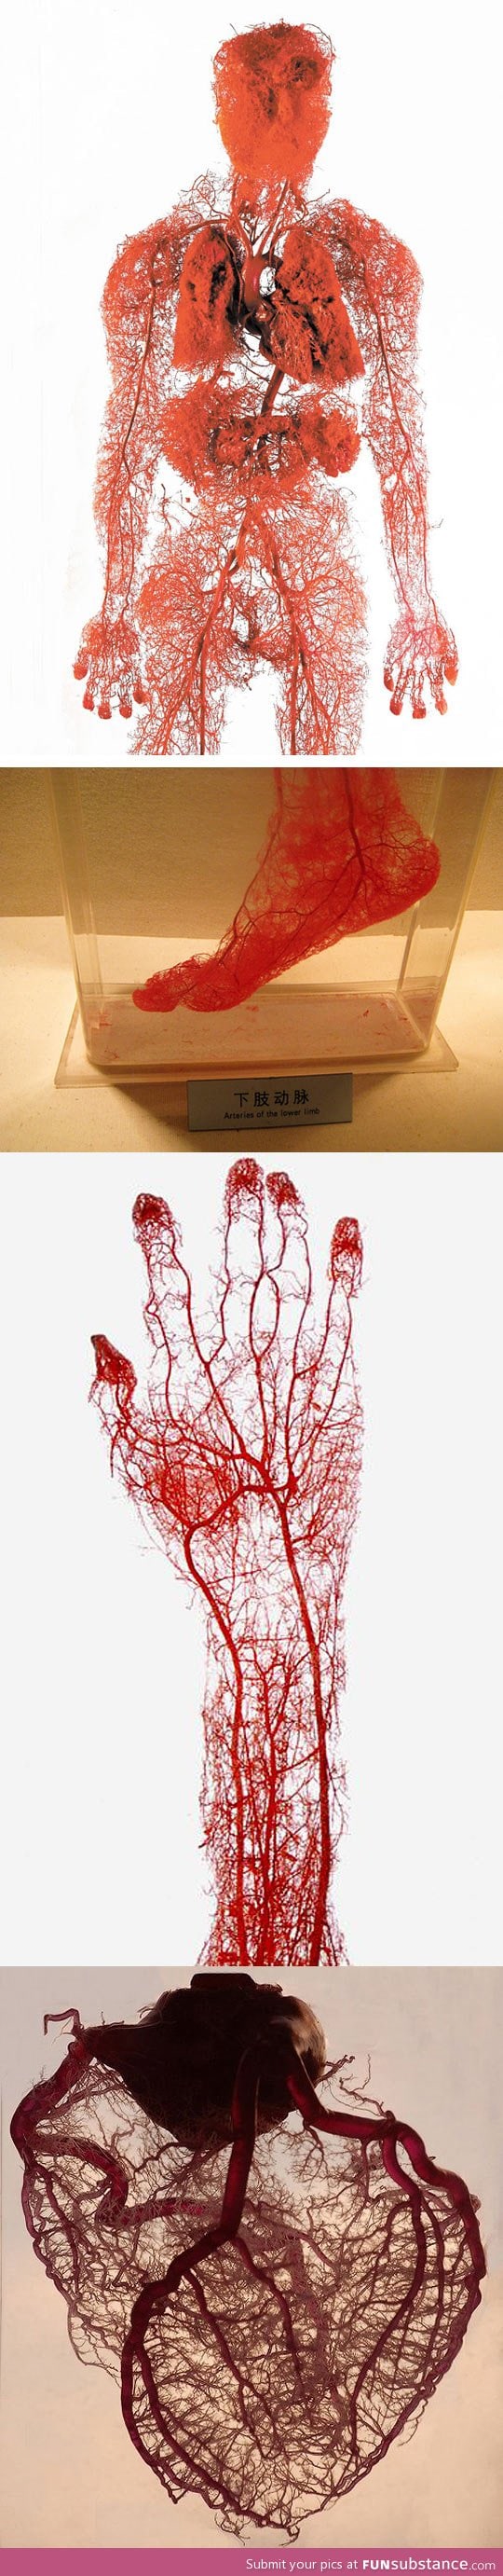 Blood vessels in the human body